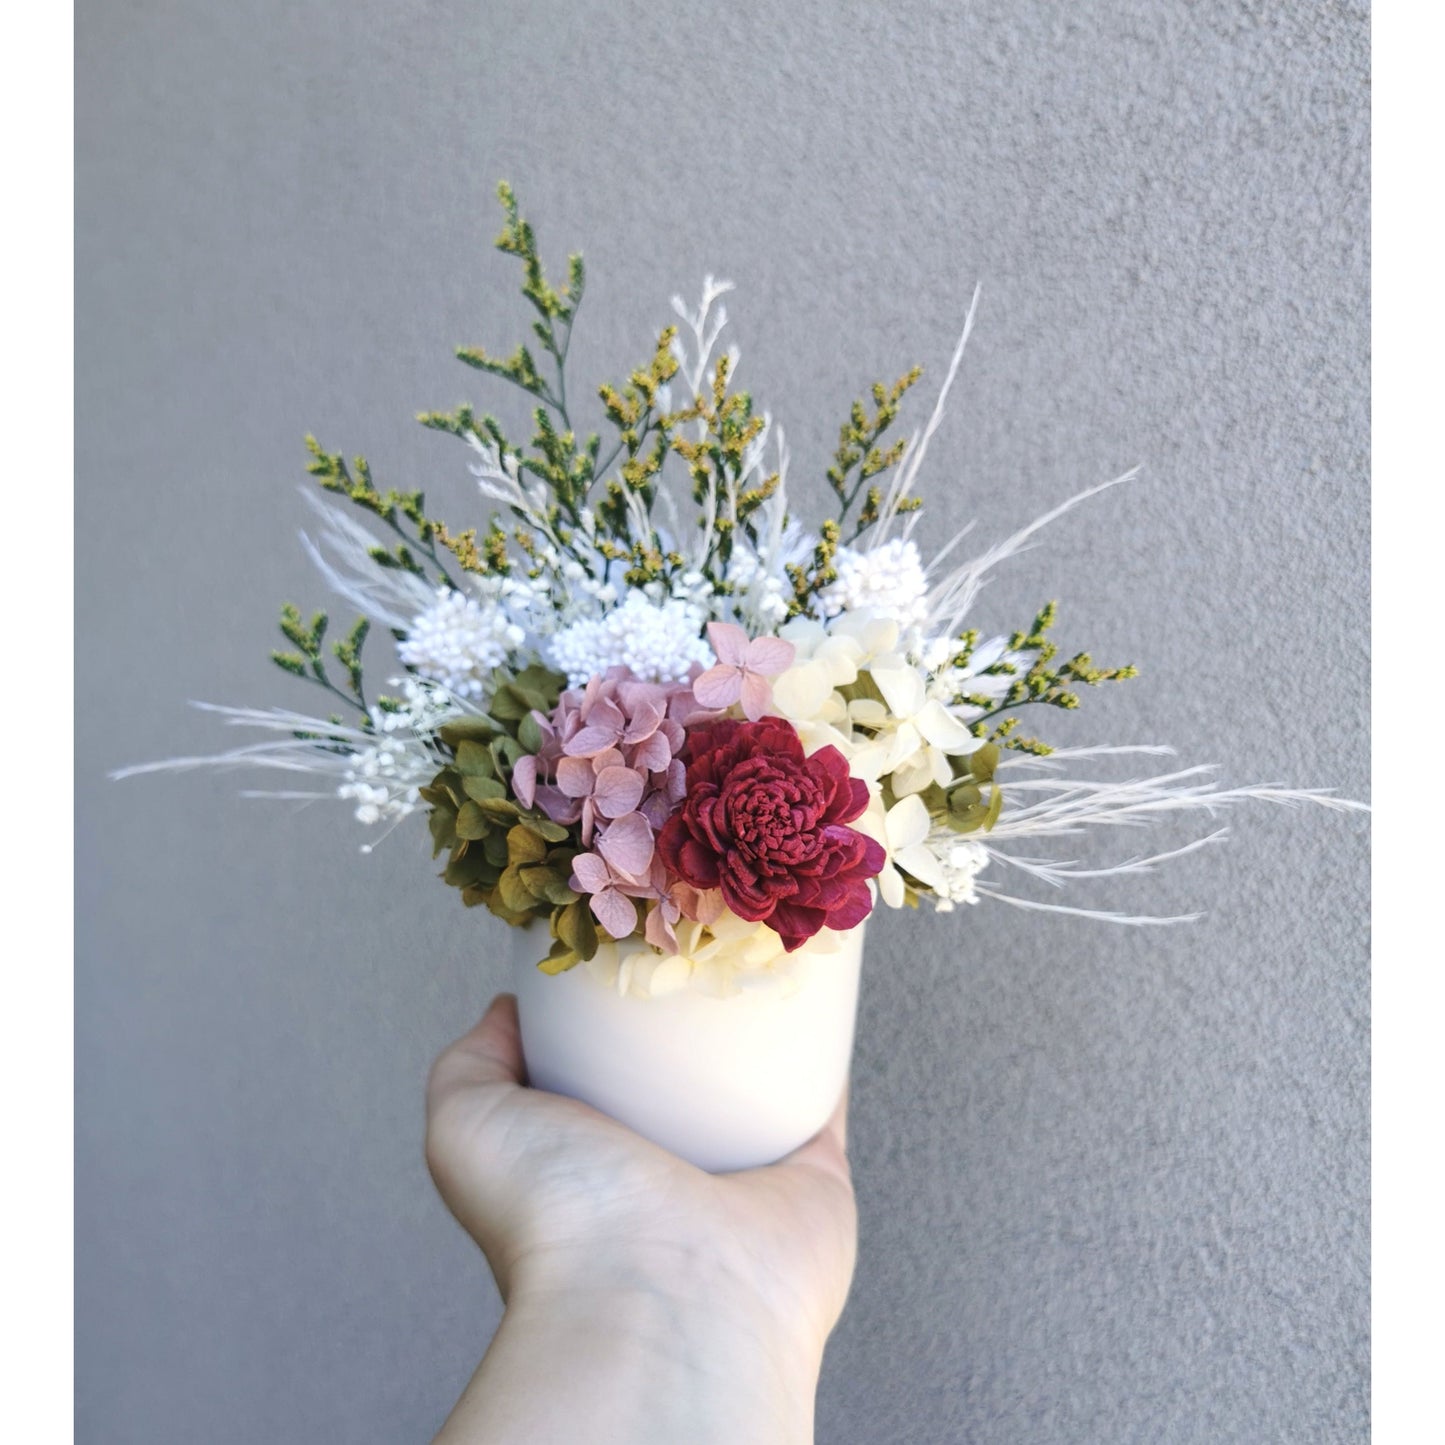 Dried & Preserved flower arrangement with green , white, yellow, pink & burgundy colours. Photo shows arrangement being held by hand in front of a blank wall